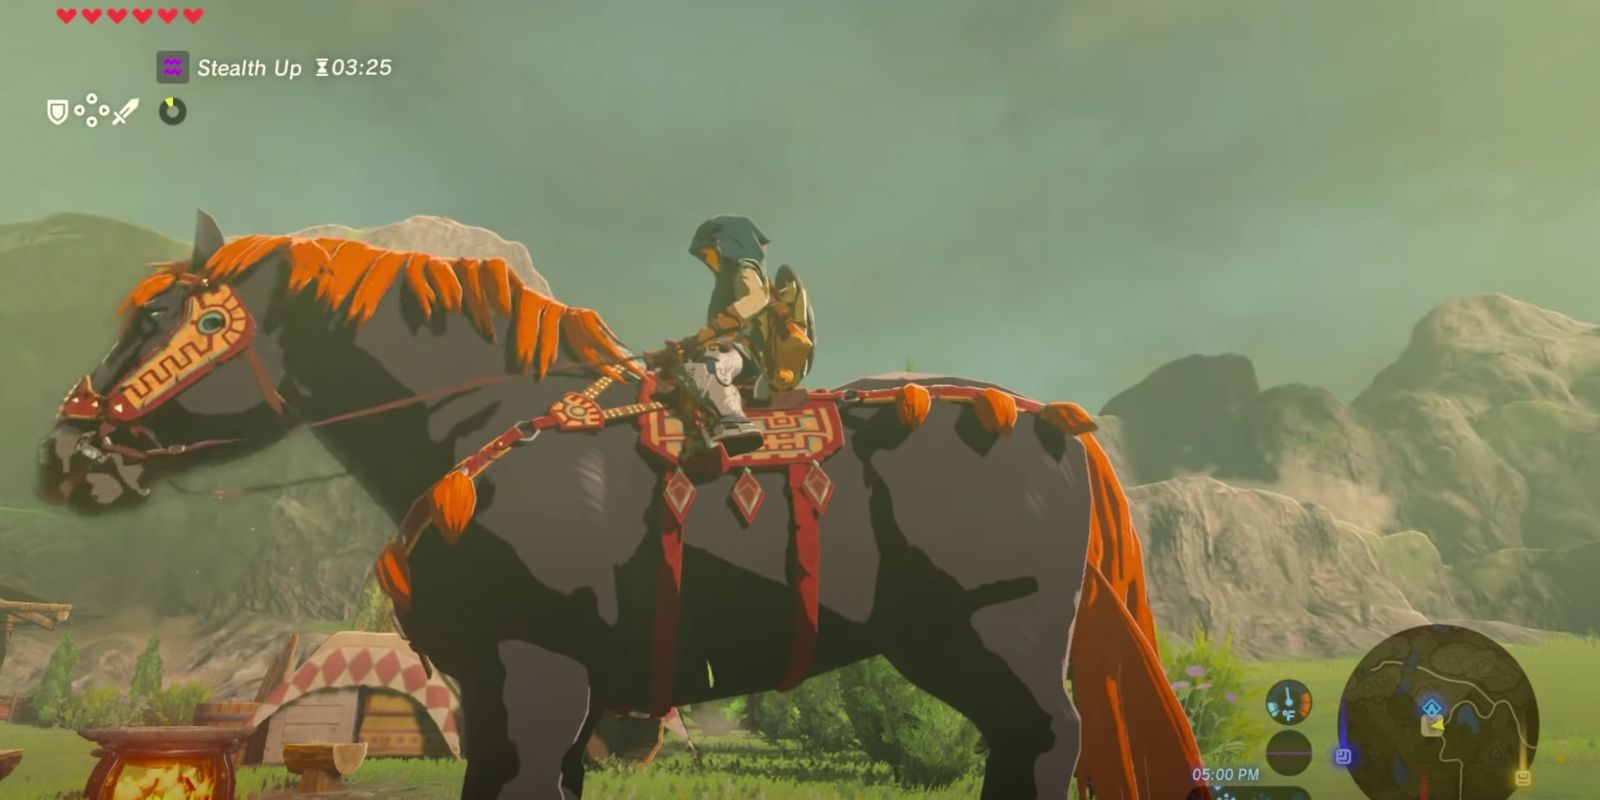 Link rides the Giant Horse.